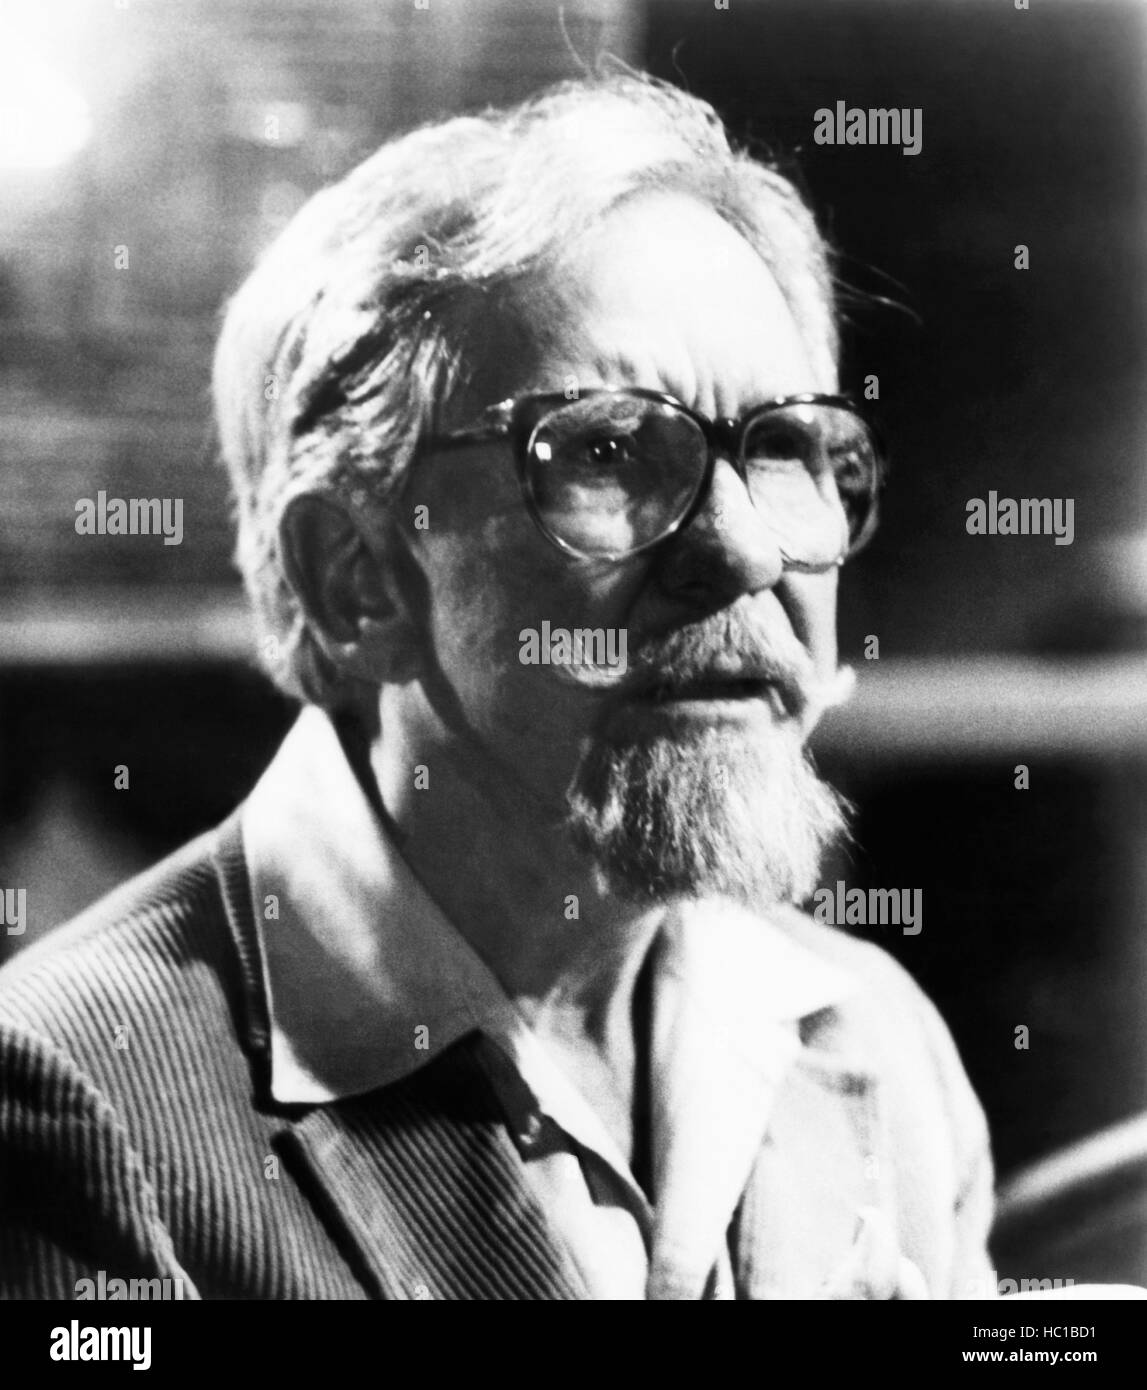 Il MANITOU, Burgess Meredith, 1978. ©AVCO Embassy Pictures/cortesia Everett Collection Foto Stock